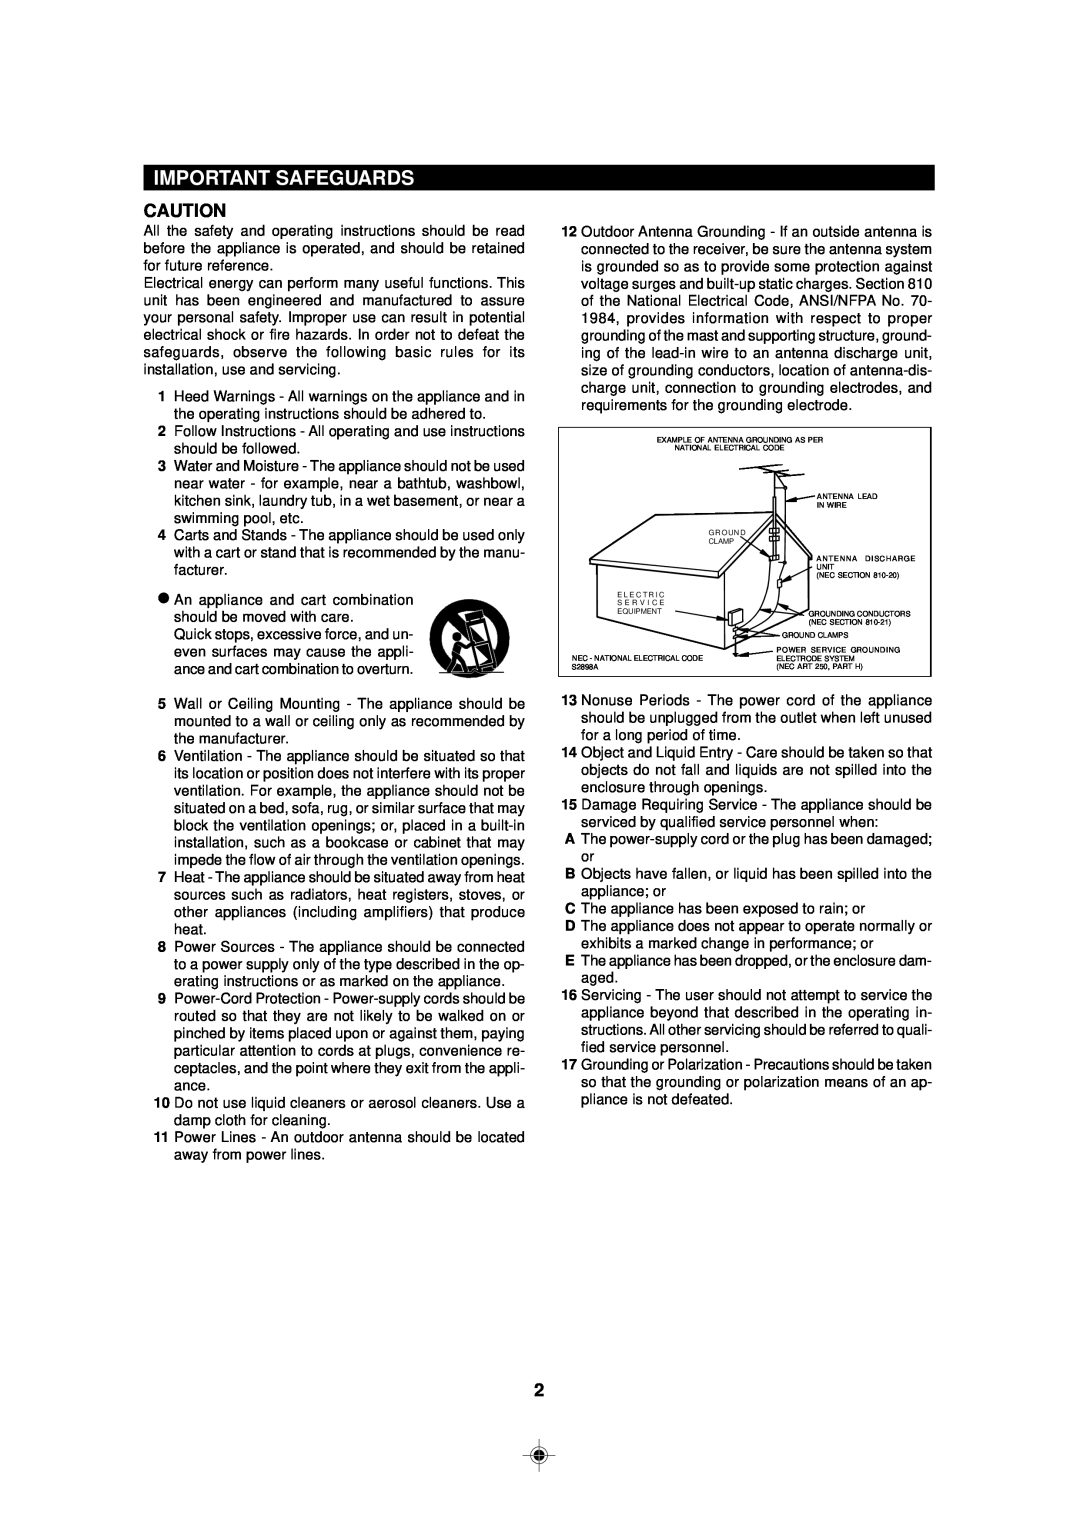 Sharp MD-MX30 MD operation manual Important Safeguards 